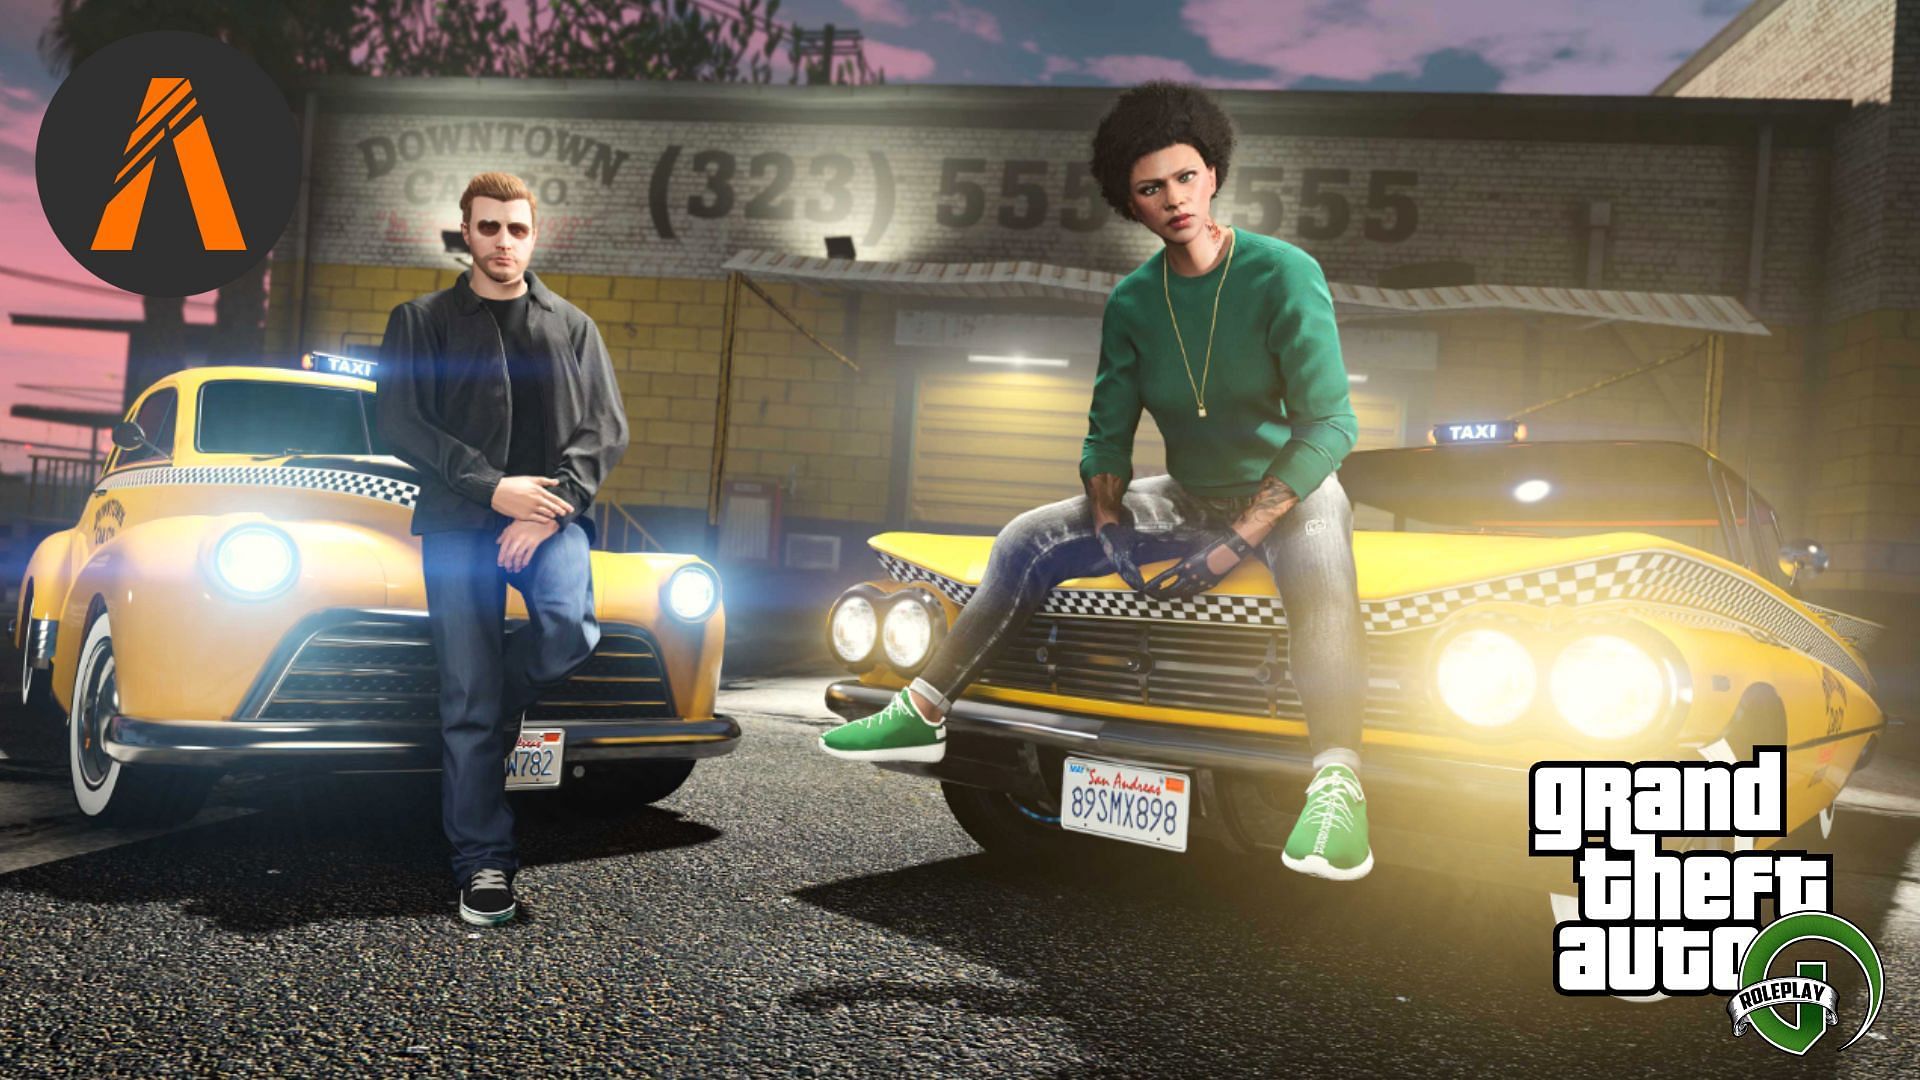 GTA RP players and servers will have to follow a new set of rules after FiveM